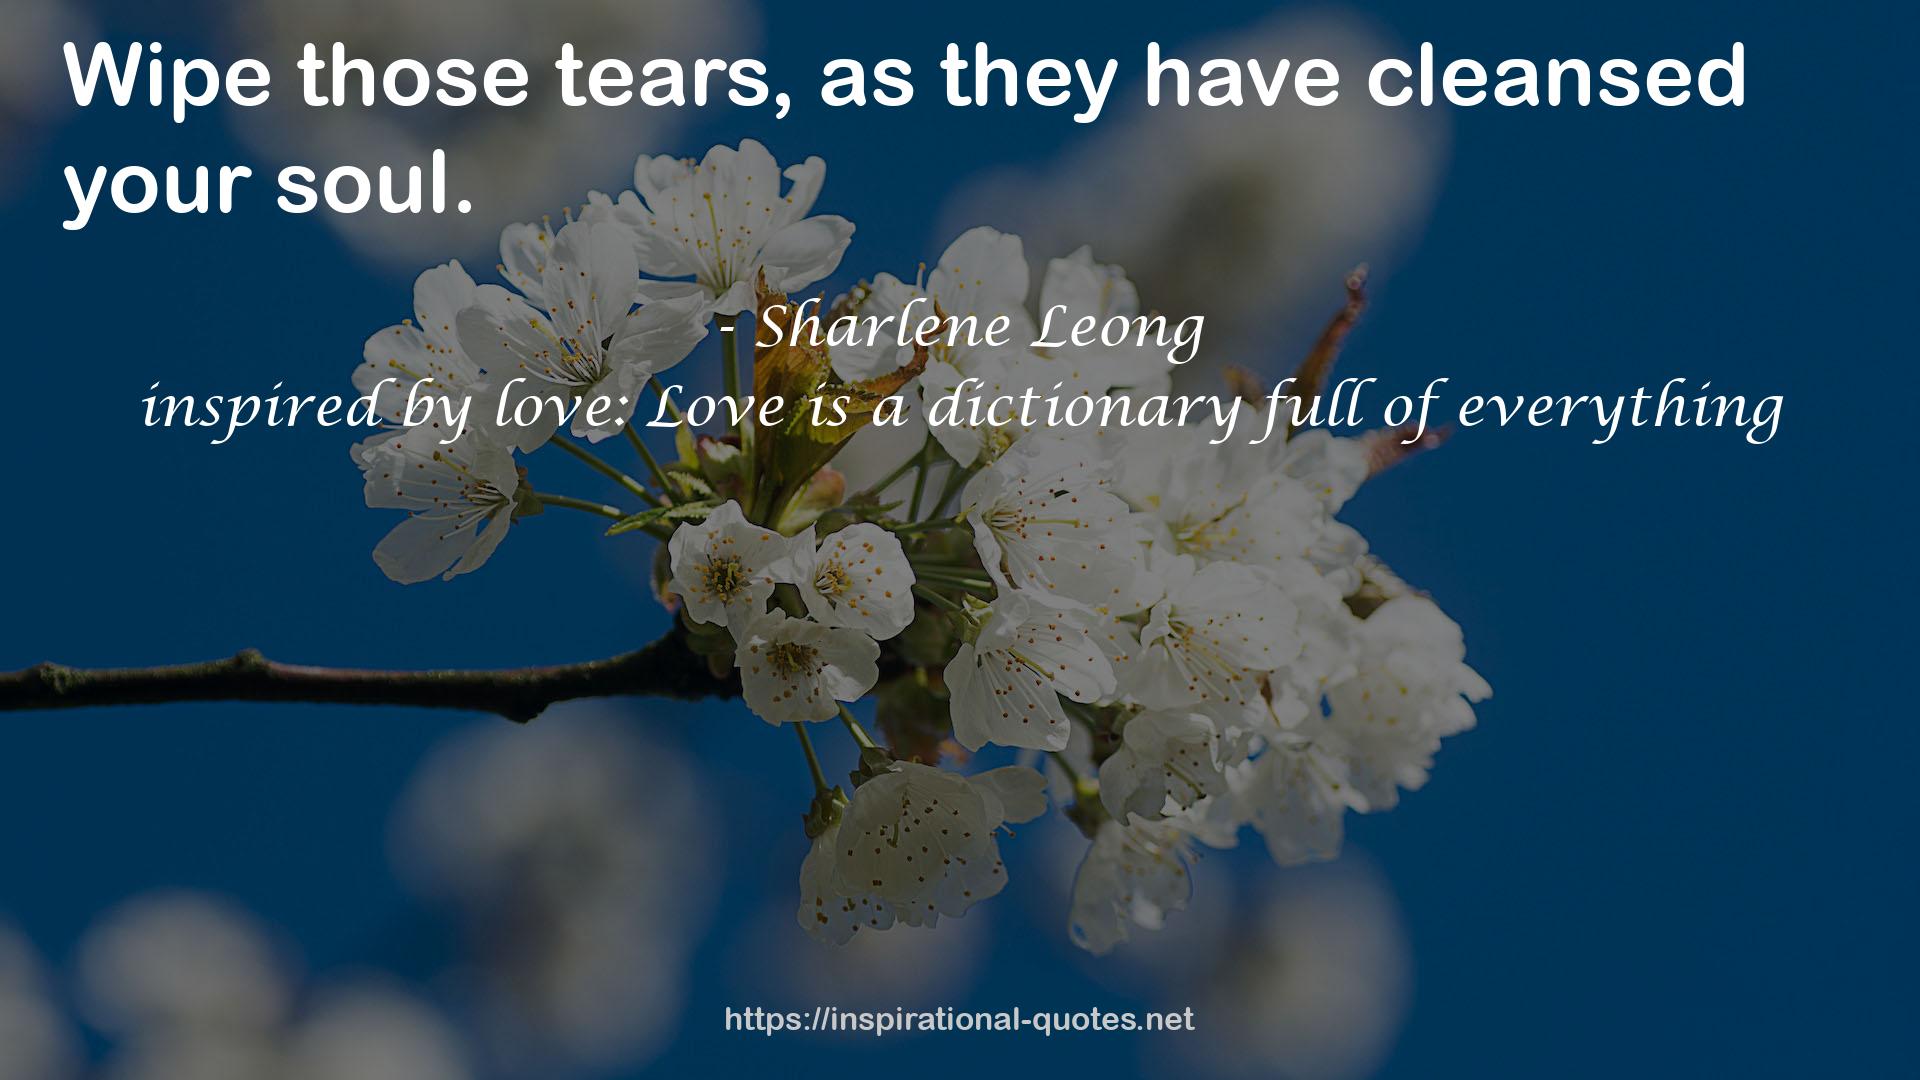 inspired by love: Love is a dictionary full of everything QUOTES